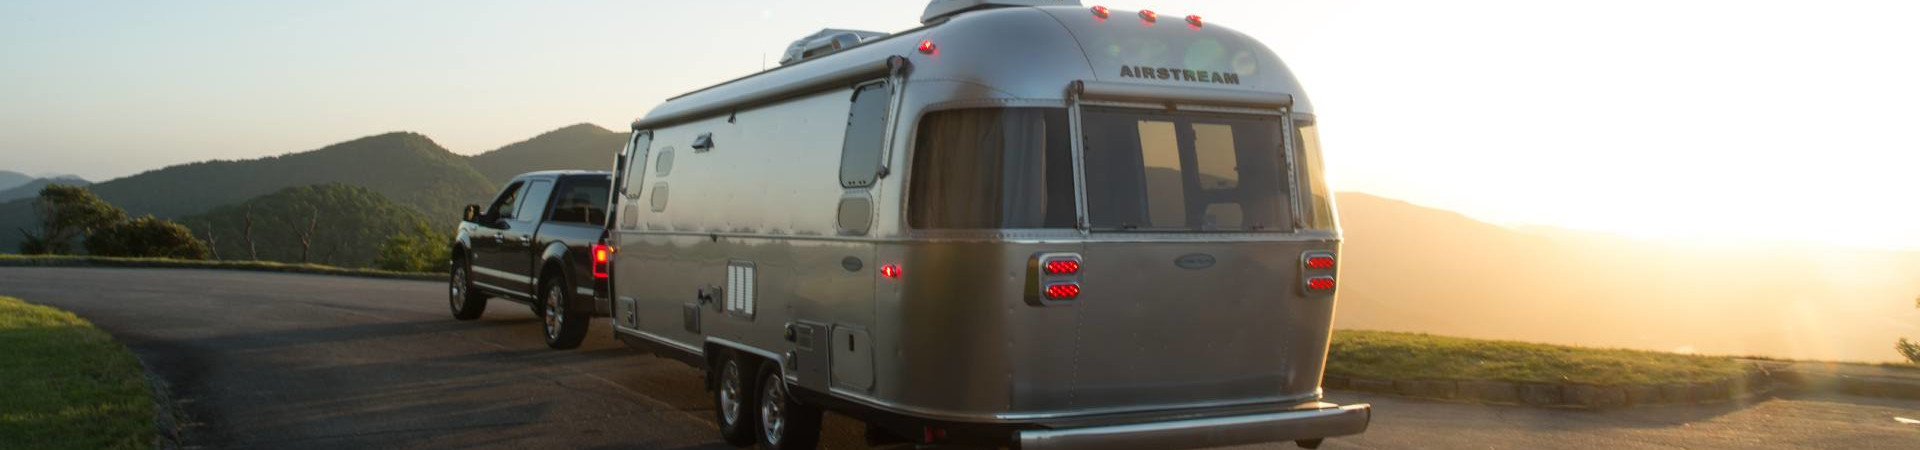 2019 Airstream for sale in Airstream Orange County, Midway City, California